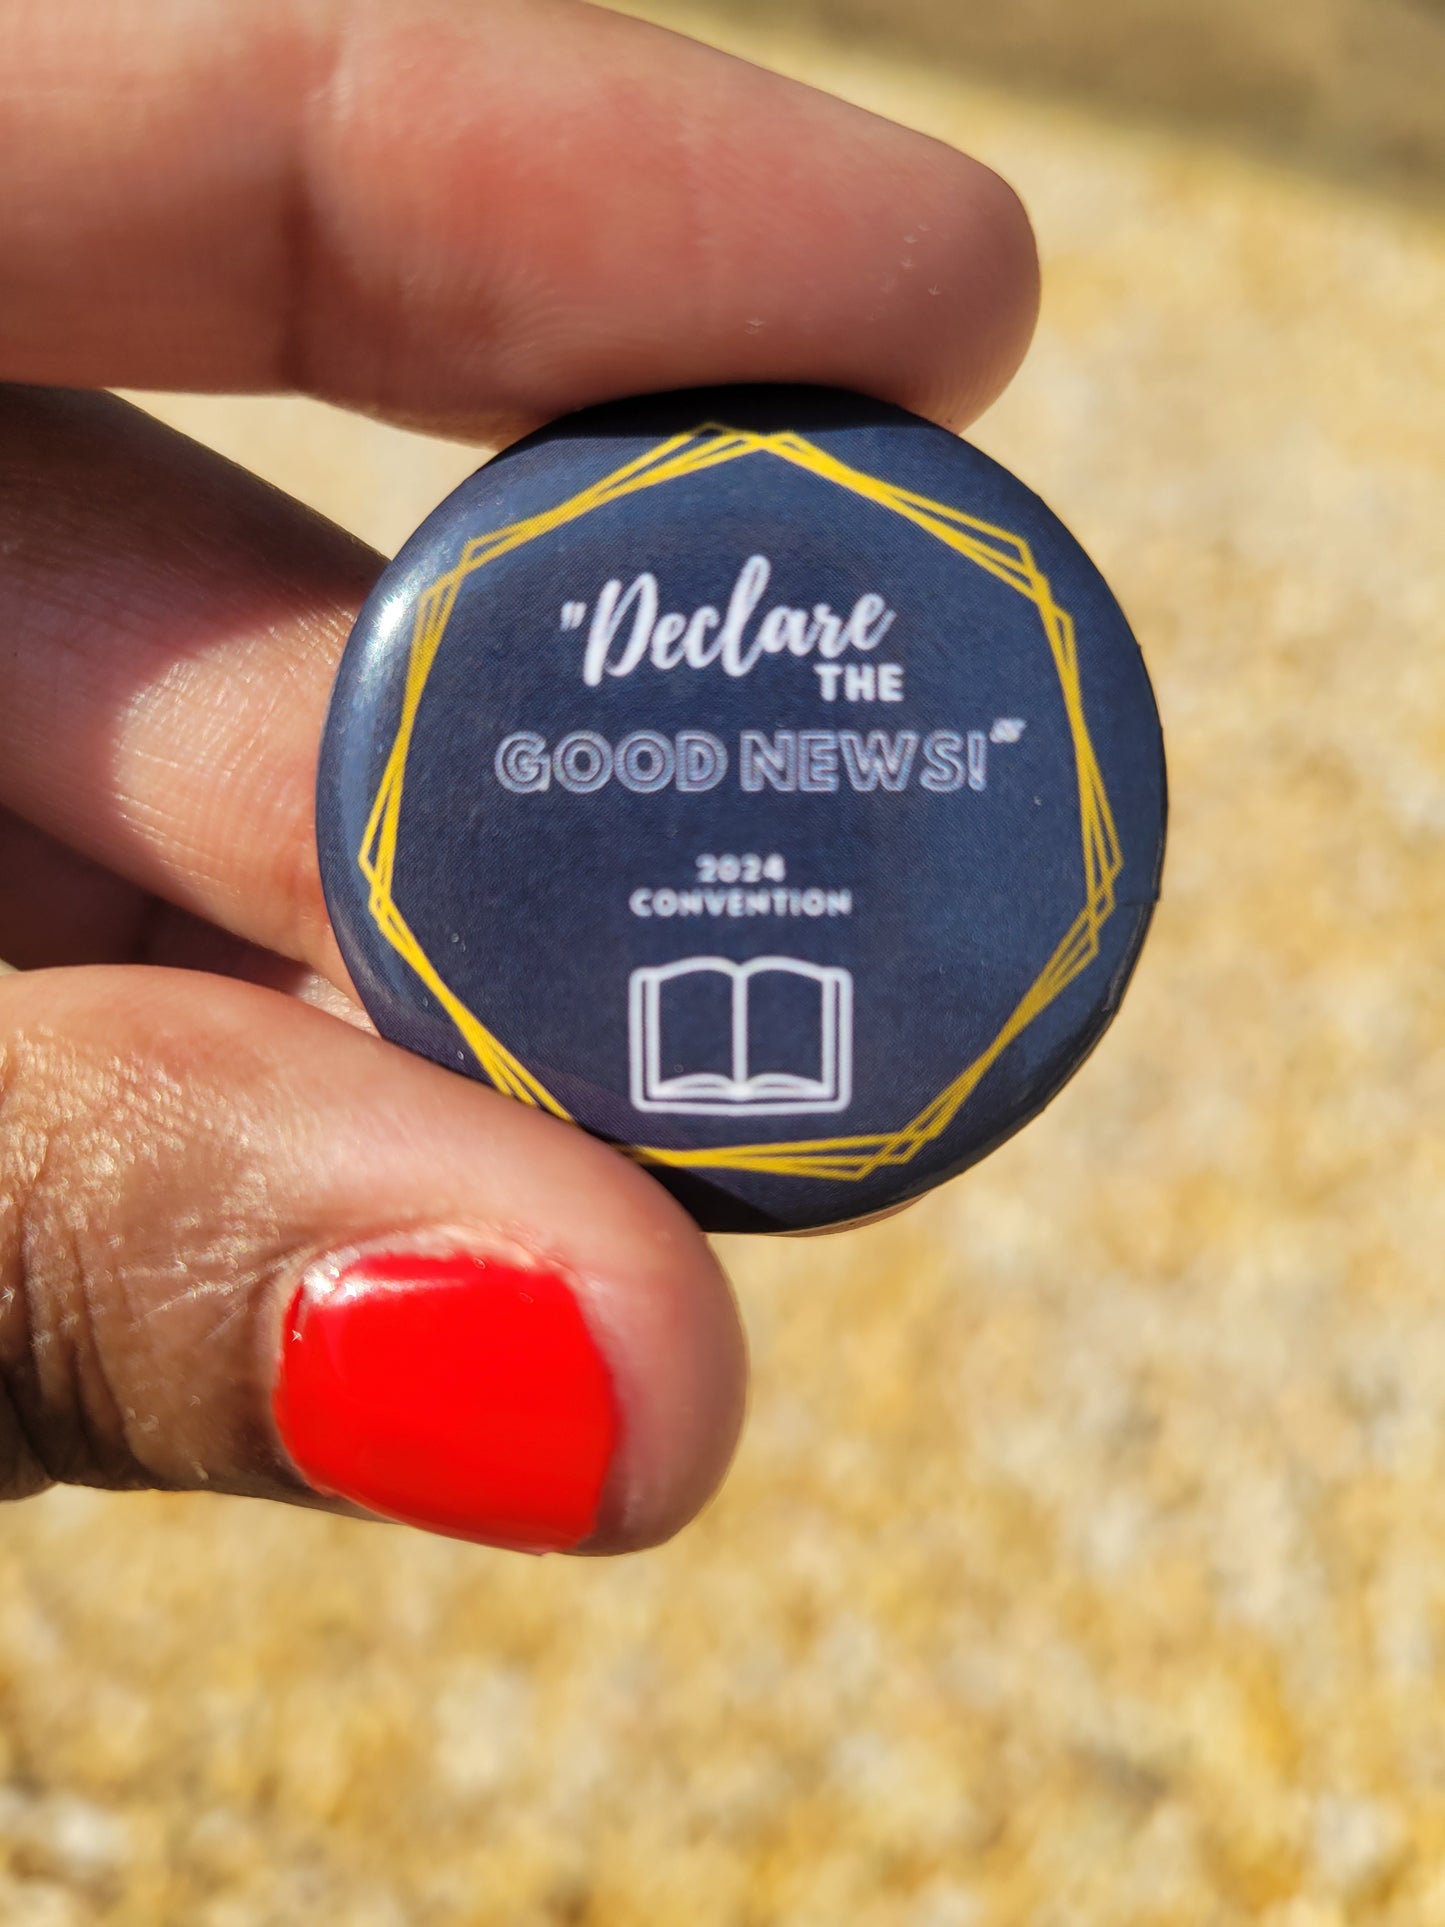 Declare the good news pins!